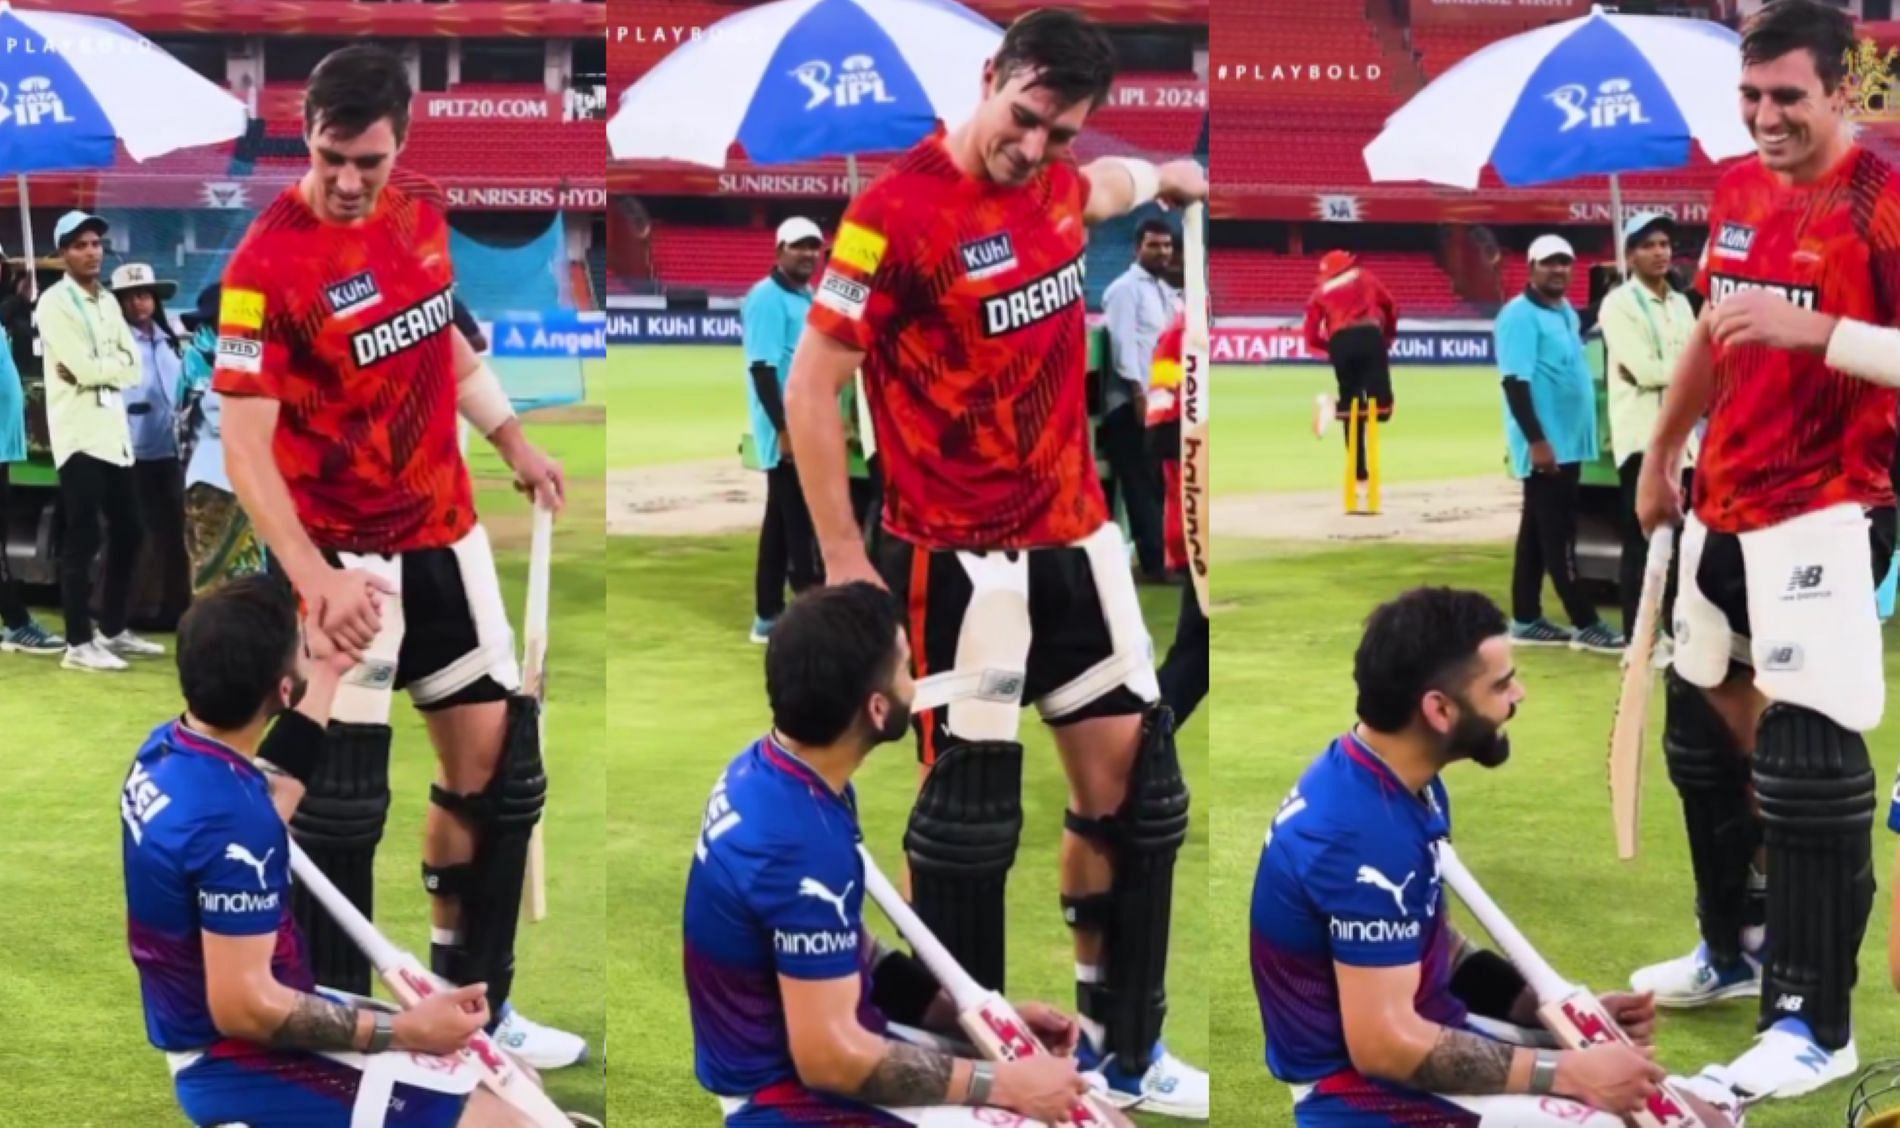 The duo have been involved in many intense battles on the field [Credit: RCB Twitter handle]